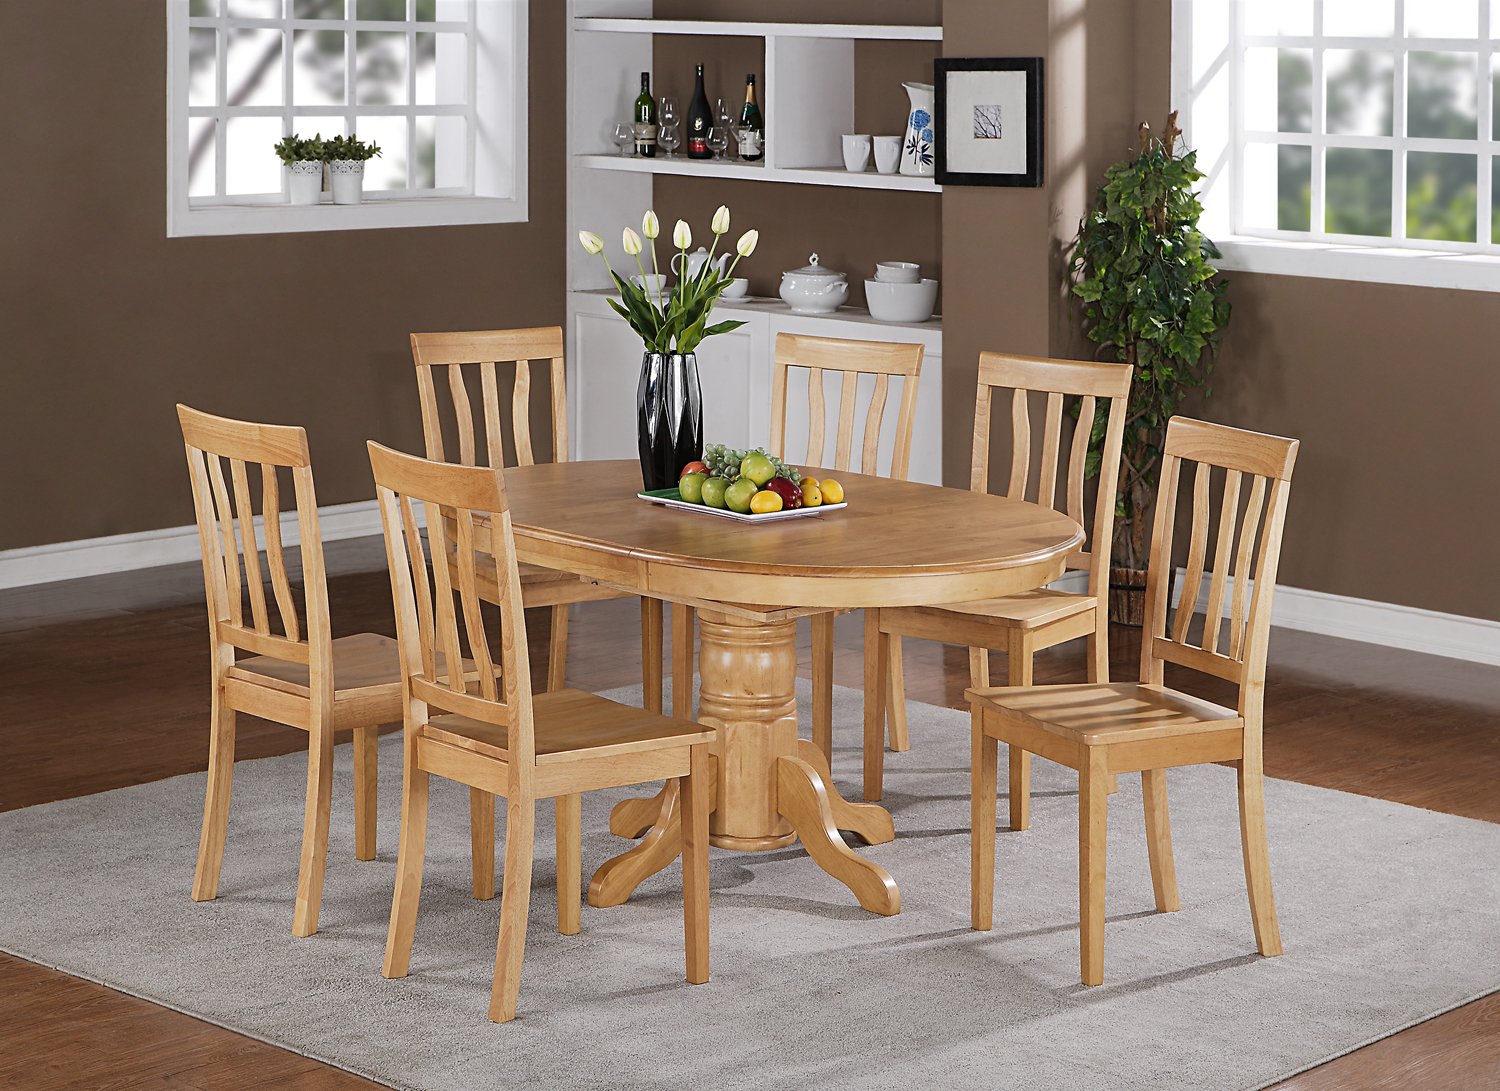 7-PC Easton Oval Dining Single Pedestal Table and 6 chairs in OAK color